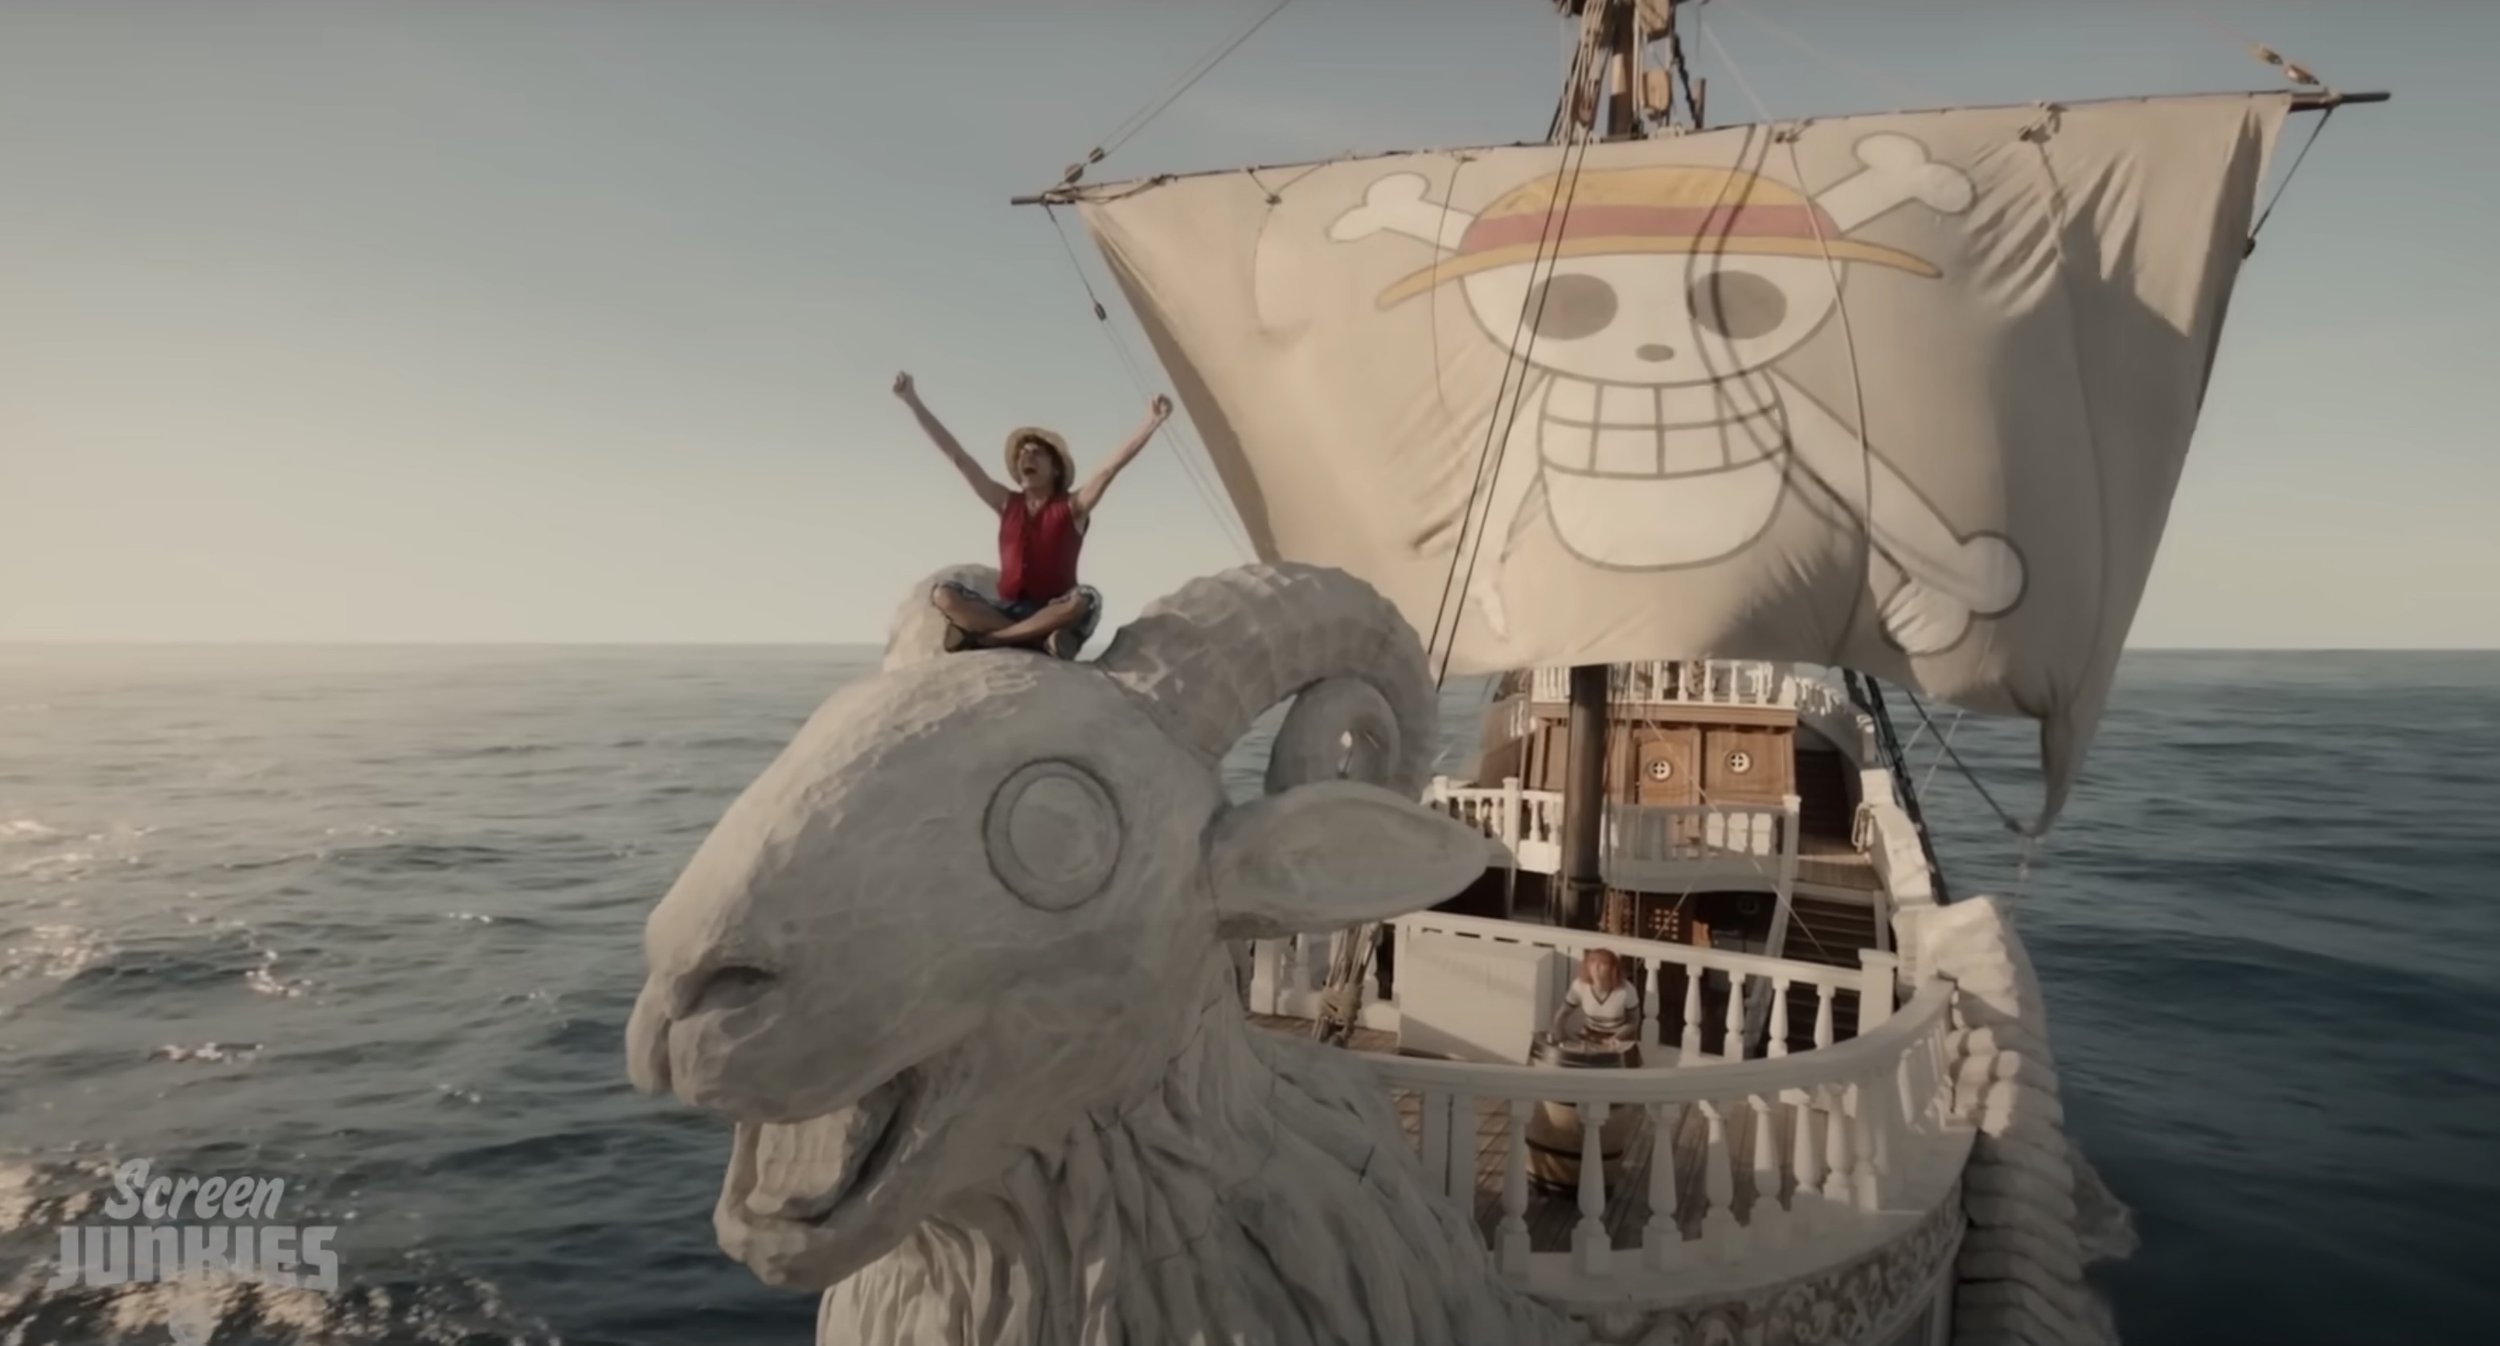 Exciting Final Trailer for Netflix's ONE PIECE Is Filled with Adventurous  Spirit! — GeekTyrant